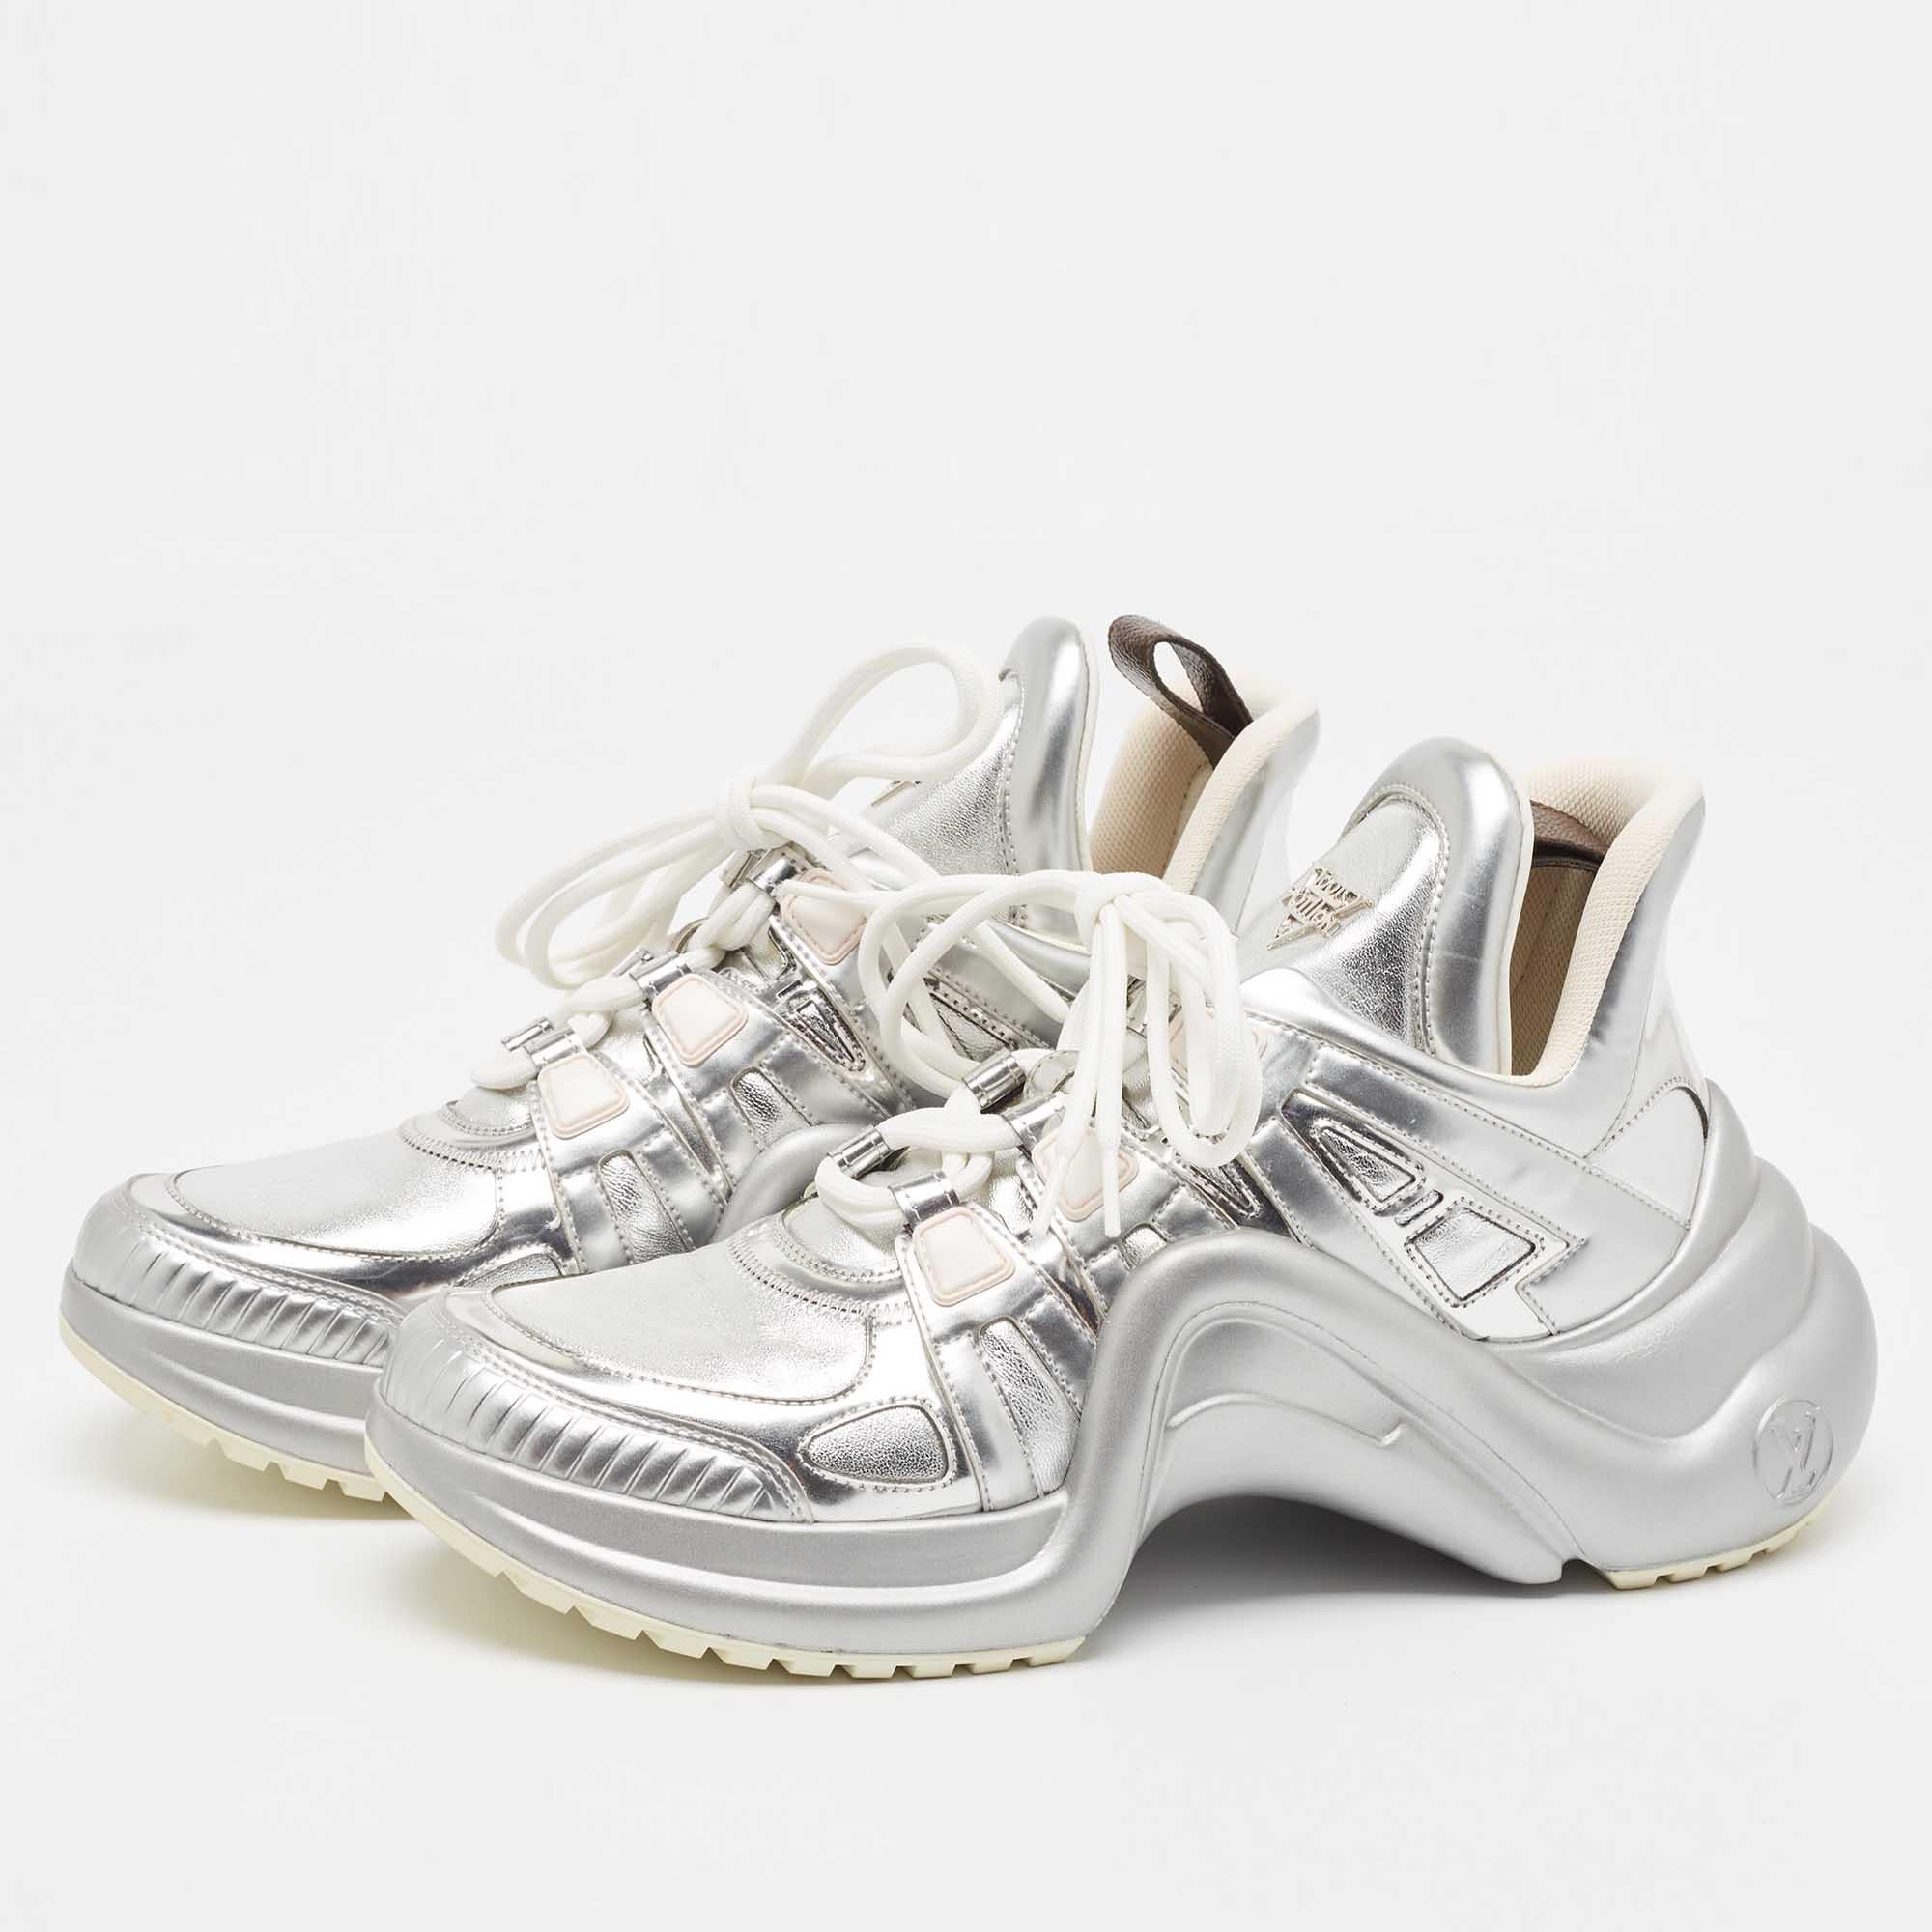 Louis Vuitton Silver Leather Archlight Sneakers Size 40 For Sale 2